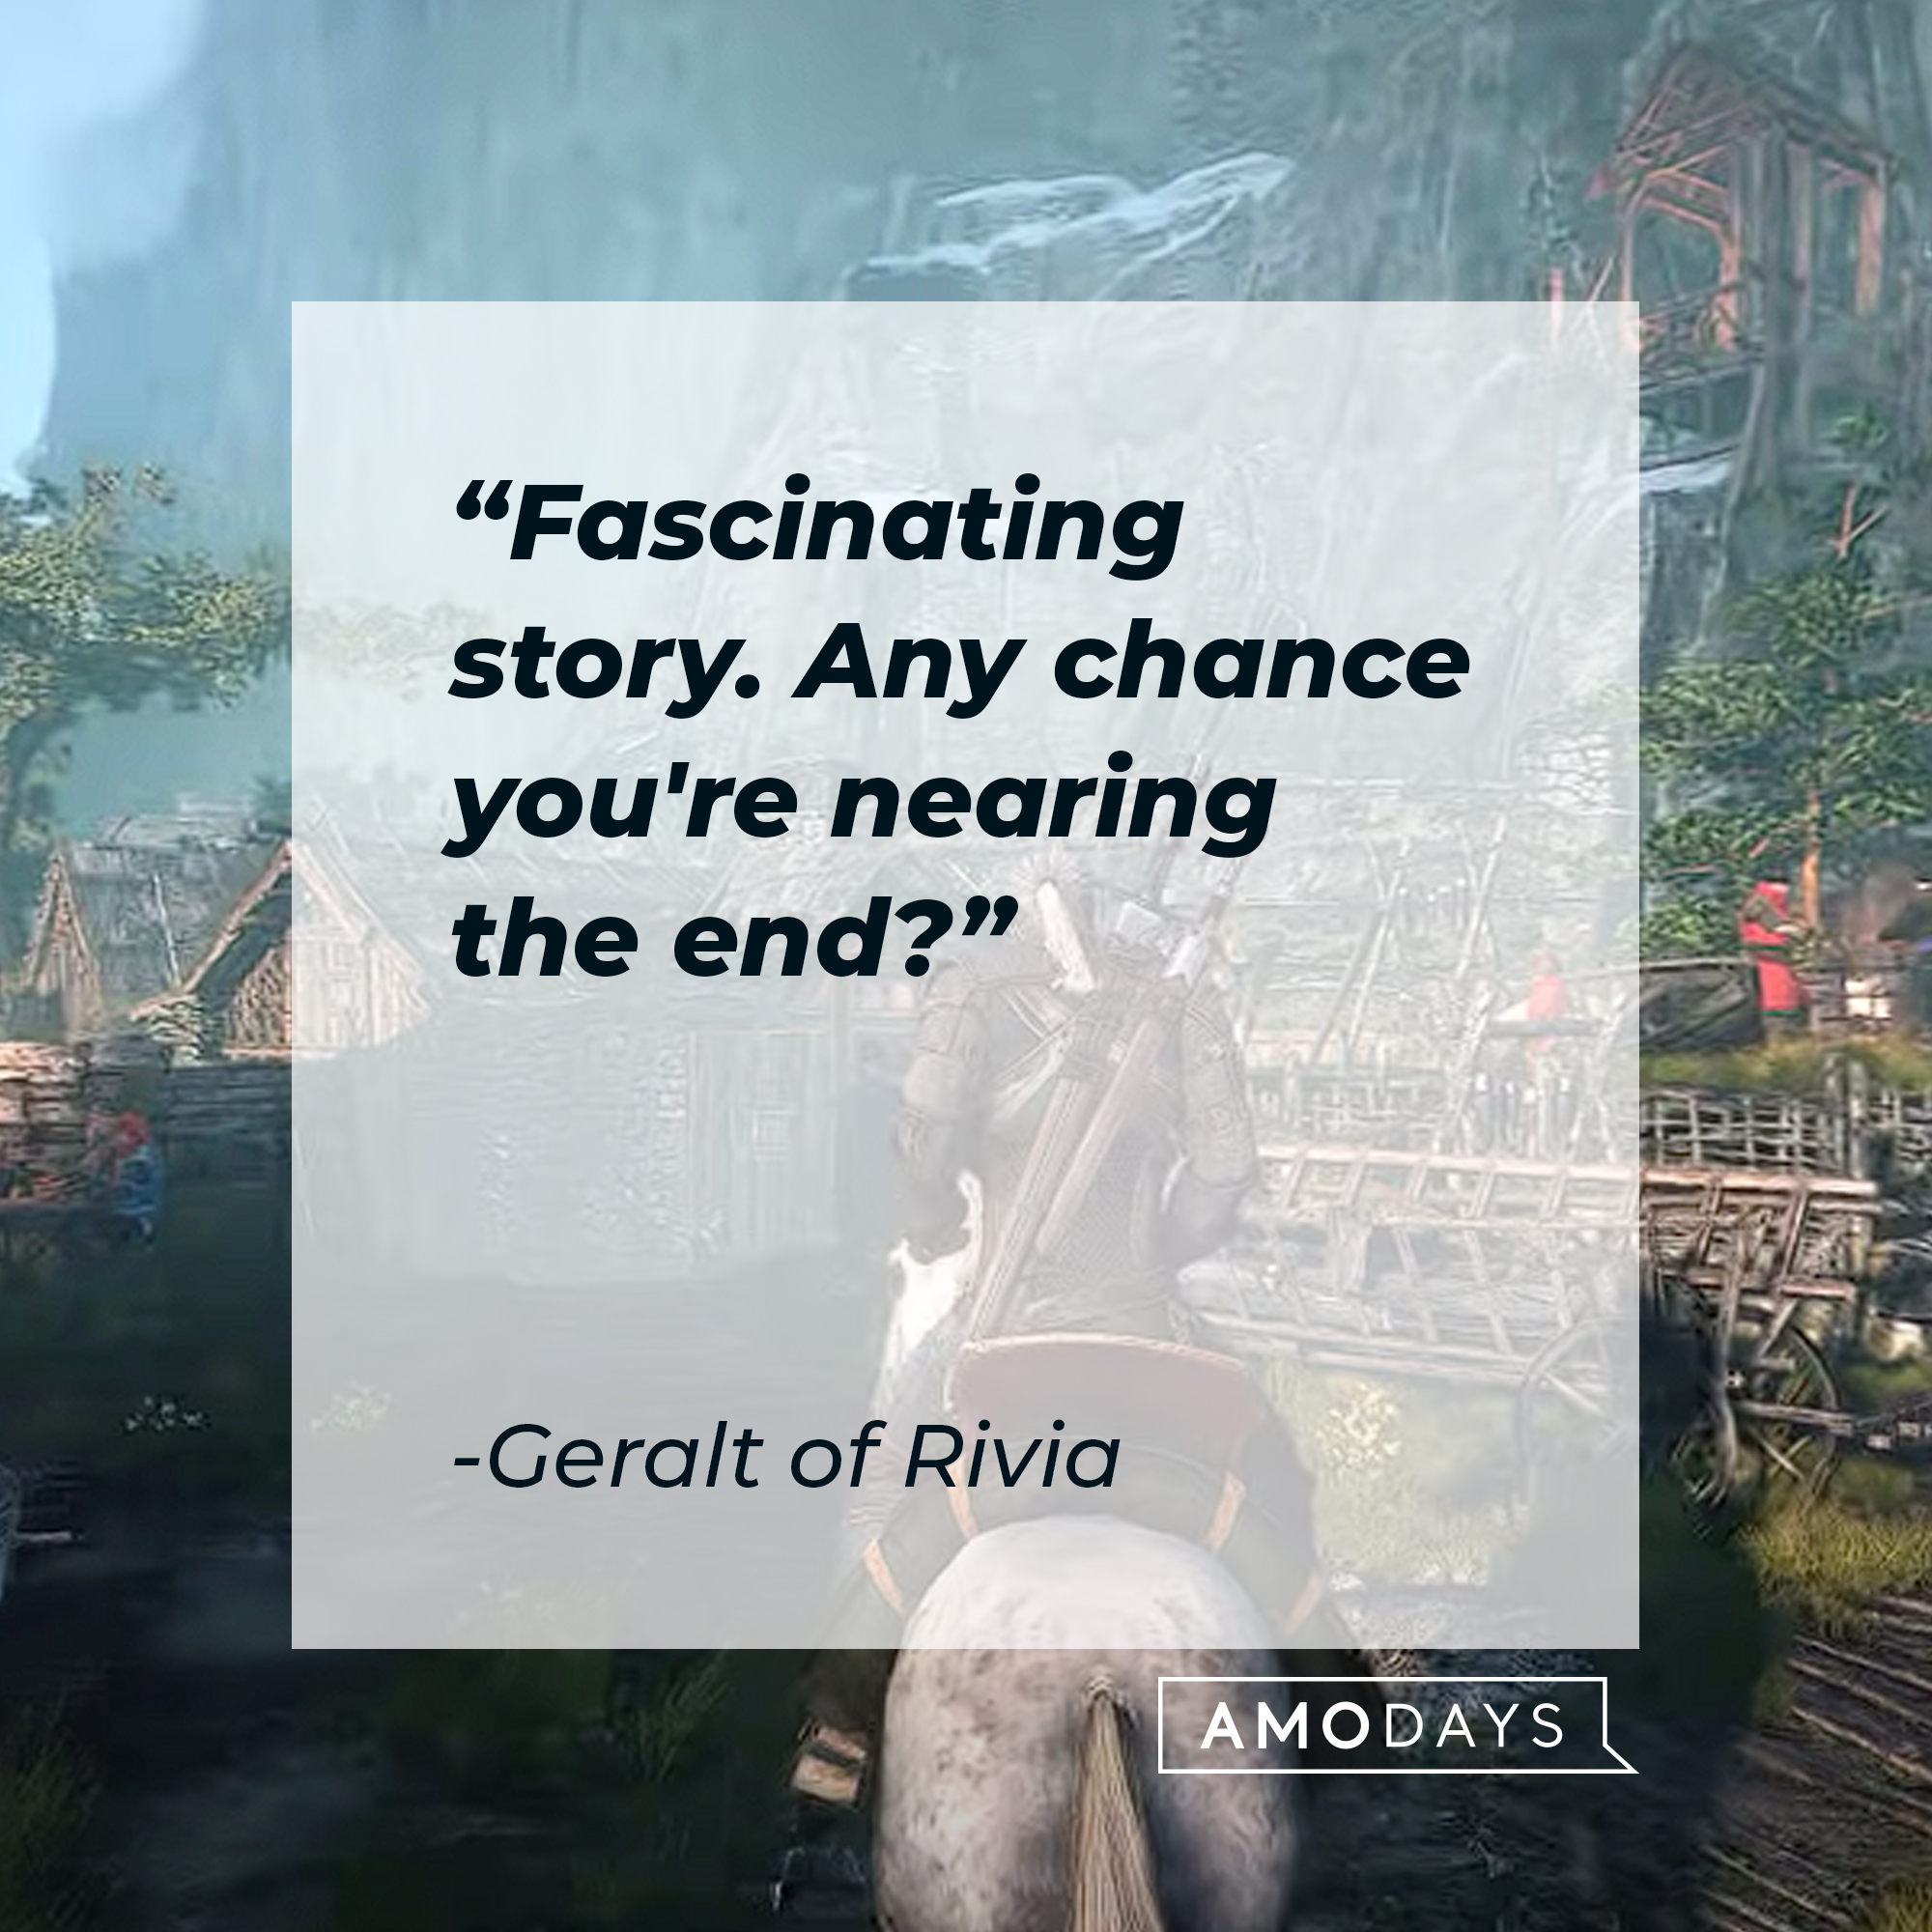 Geralt of Rivia from the video game with his quote: “Fascinating story. Any chance you're nearing the end?” | Source: youtube.com/thewitcher